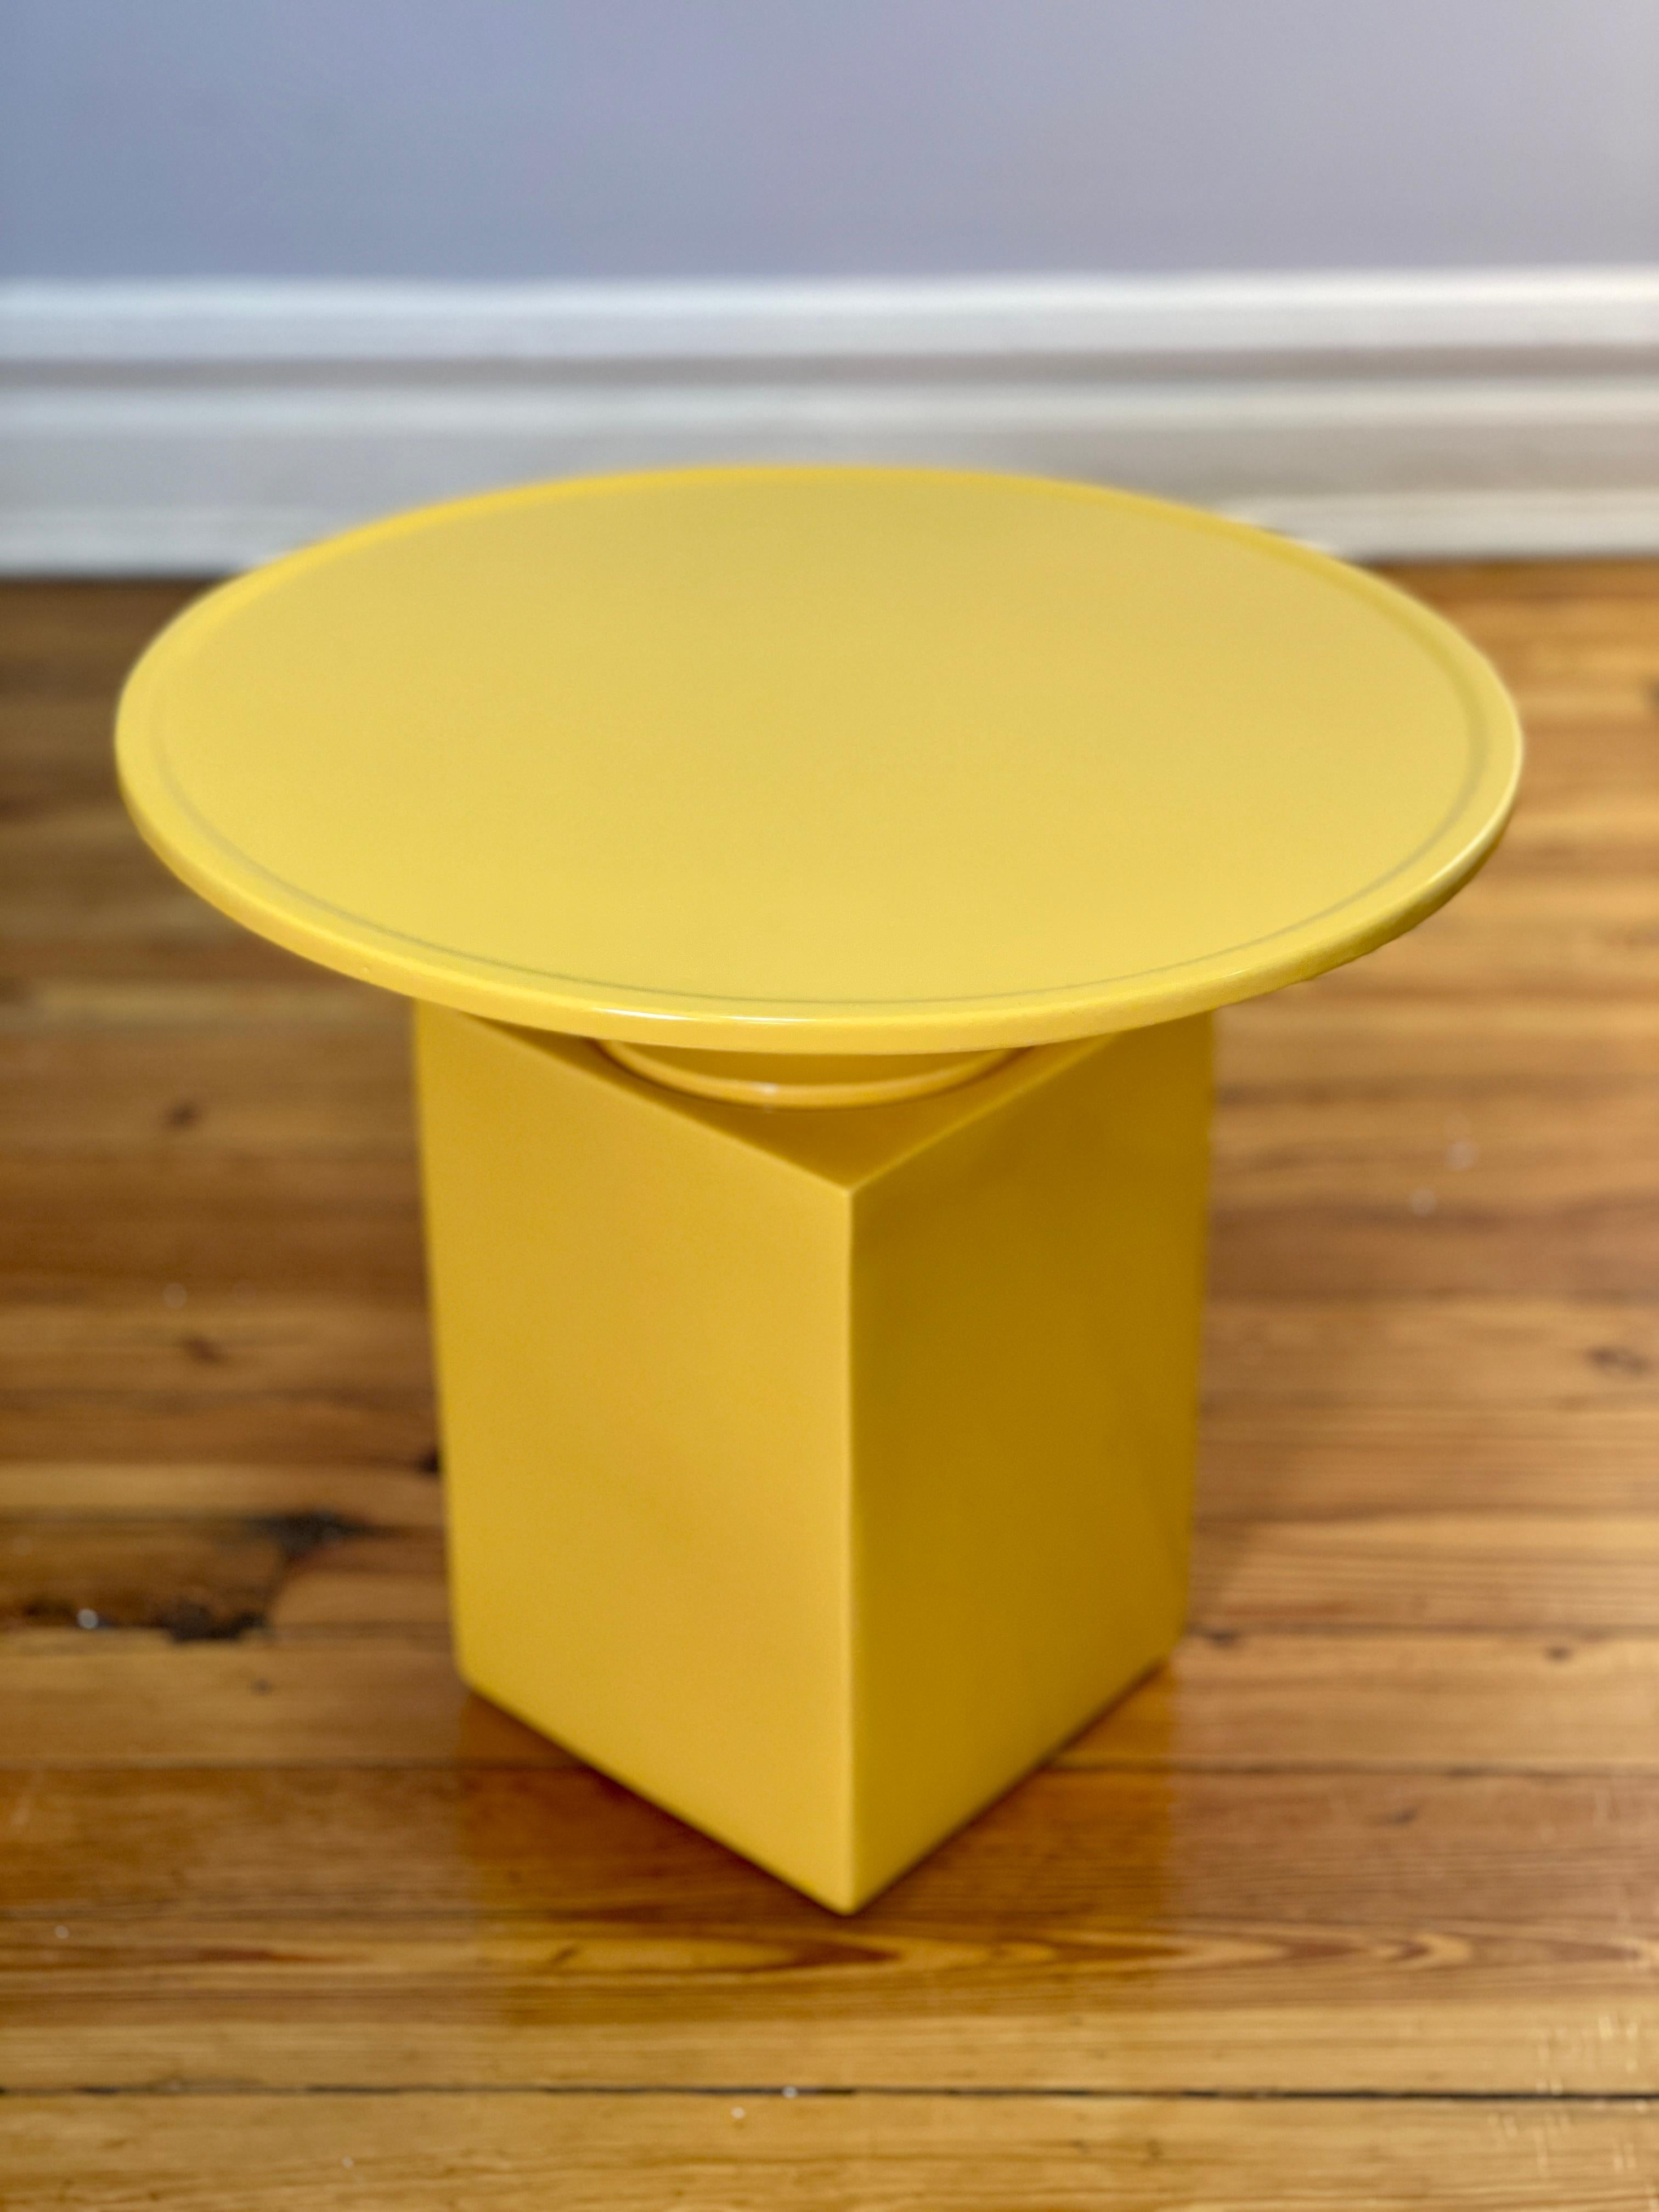 This contemporary side table is part of the Delcourt Collection. Edition by Christophe Delcourt and design by Vincent Dupont-Rougier.  the OUK side table is in ceramic and beautifully glazed with a vibrant yellow tone. Its design resembles a